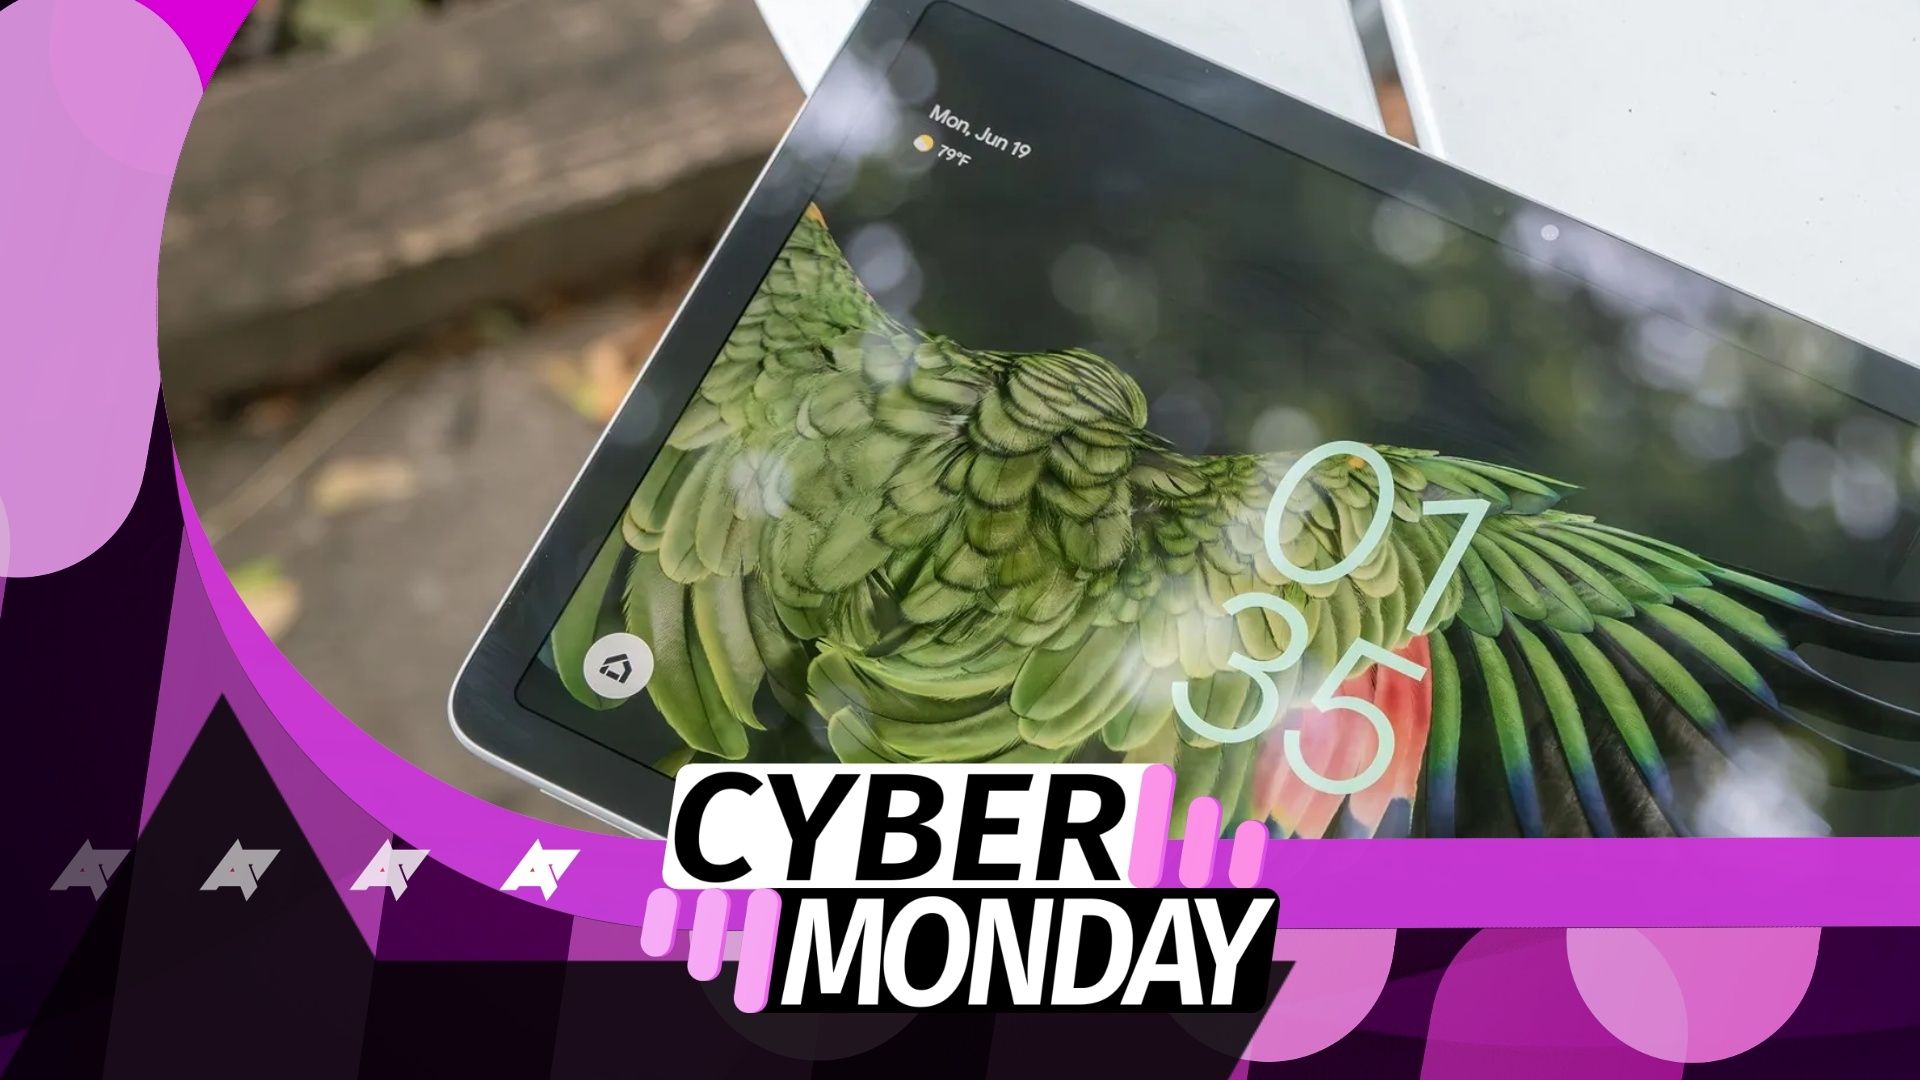 A photo of the Pixel Tablet with a Cyber Monday banner overlaid on top